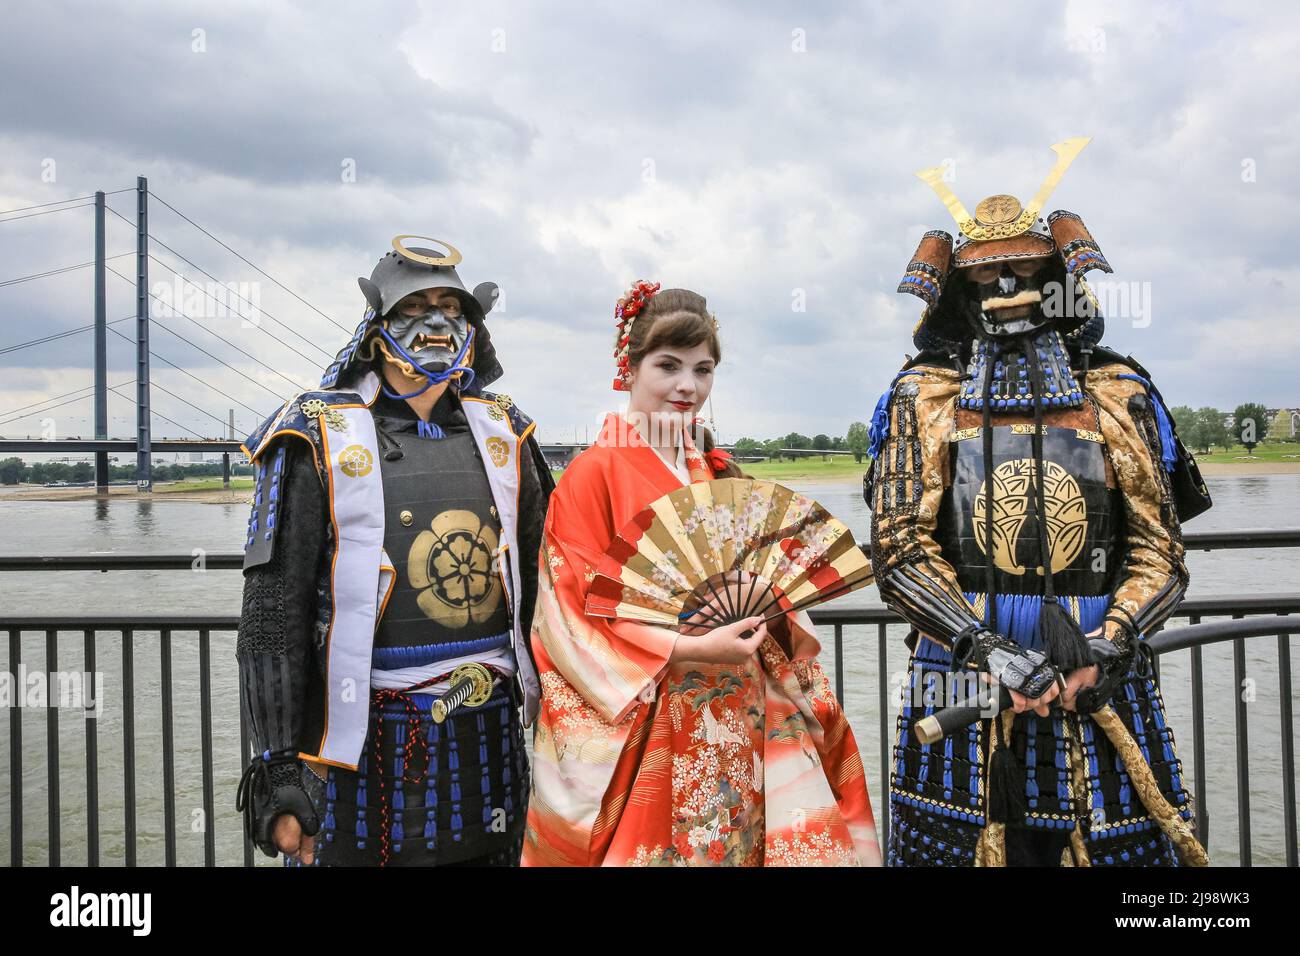 Düsseldorf, NRW, Germany. 21st May, 2022. Tens of thousands of visitors and cosplayers enjoy the warm sunshine along the river Rhine embankment in their outfits inspired by Japanese anime, video and games. Stage performances, cosplay, stalls and demonstrations of Japanese culture, sports and traditions are featured at Düsseldorf's annual Japan Day, celebrating Japan and the Japanese community in the city. Düsseldorf is home to the largest Japanese community in Germany. Credit: Imageplotter/Alamy Live News Stock Photo